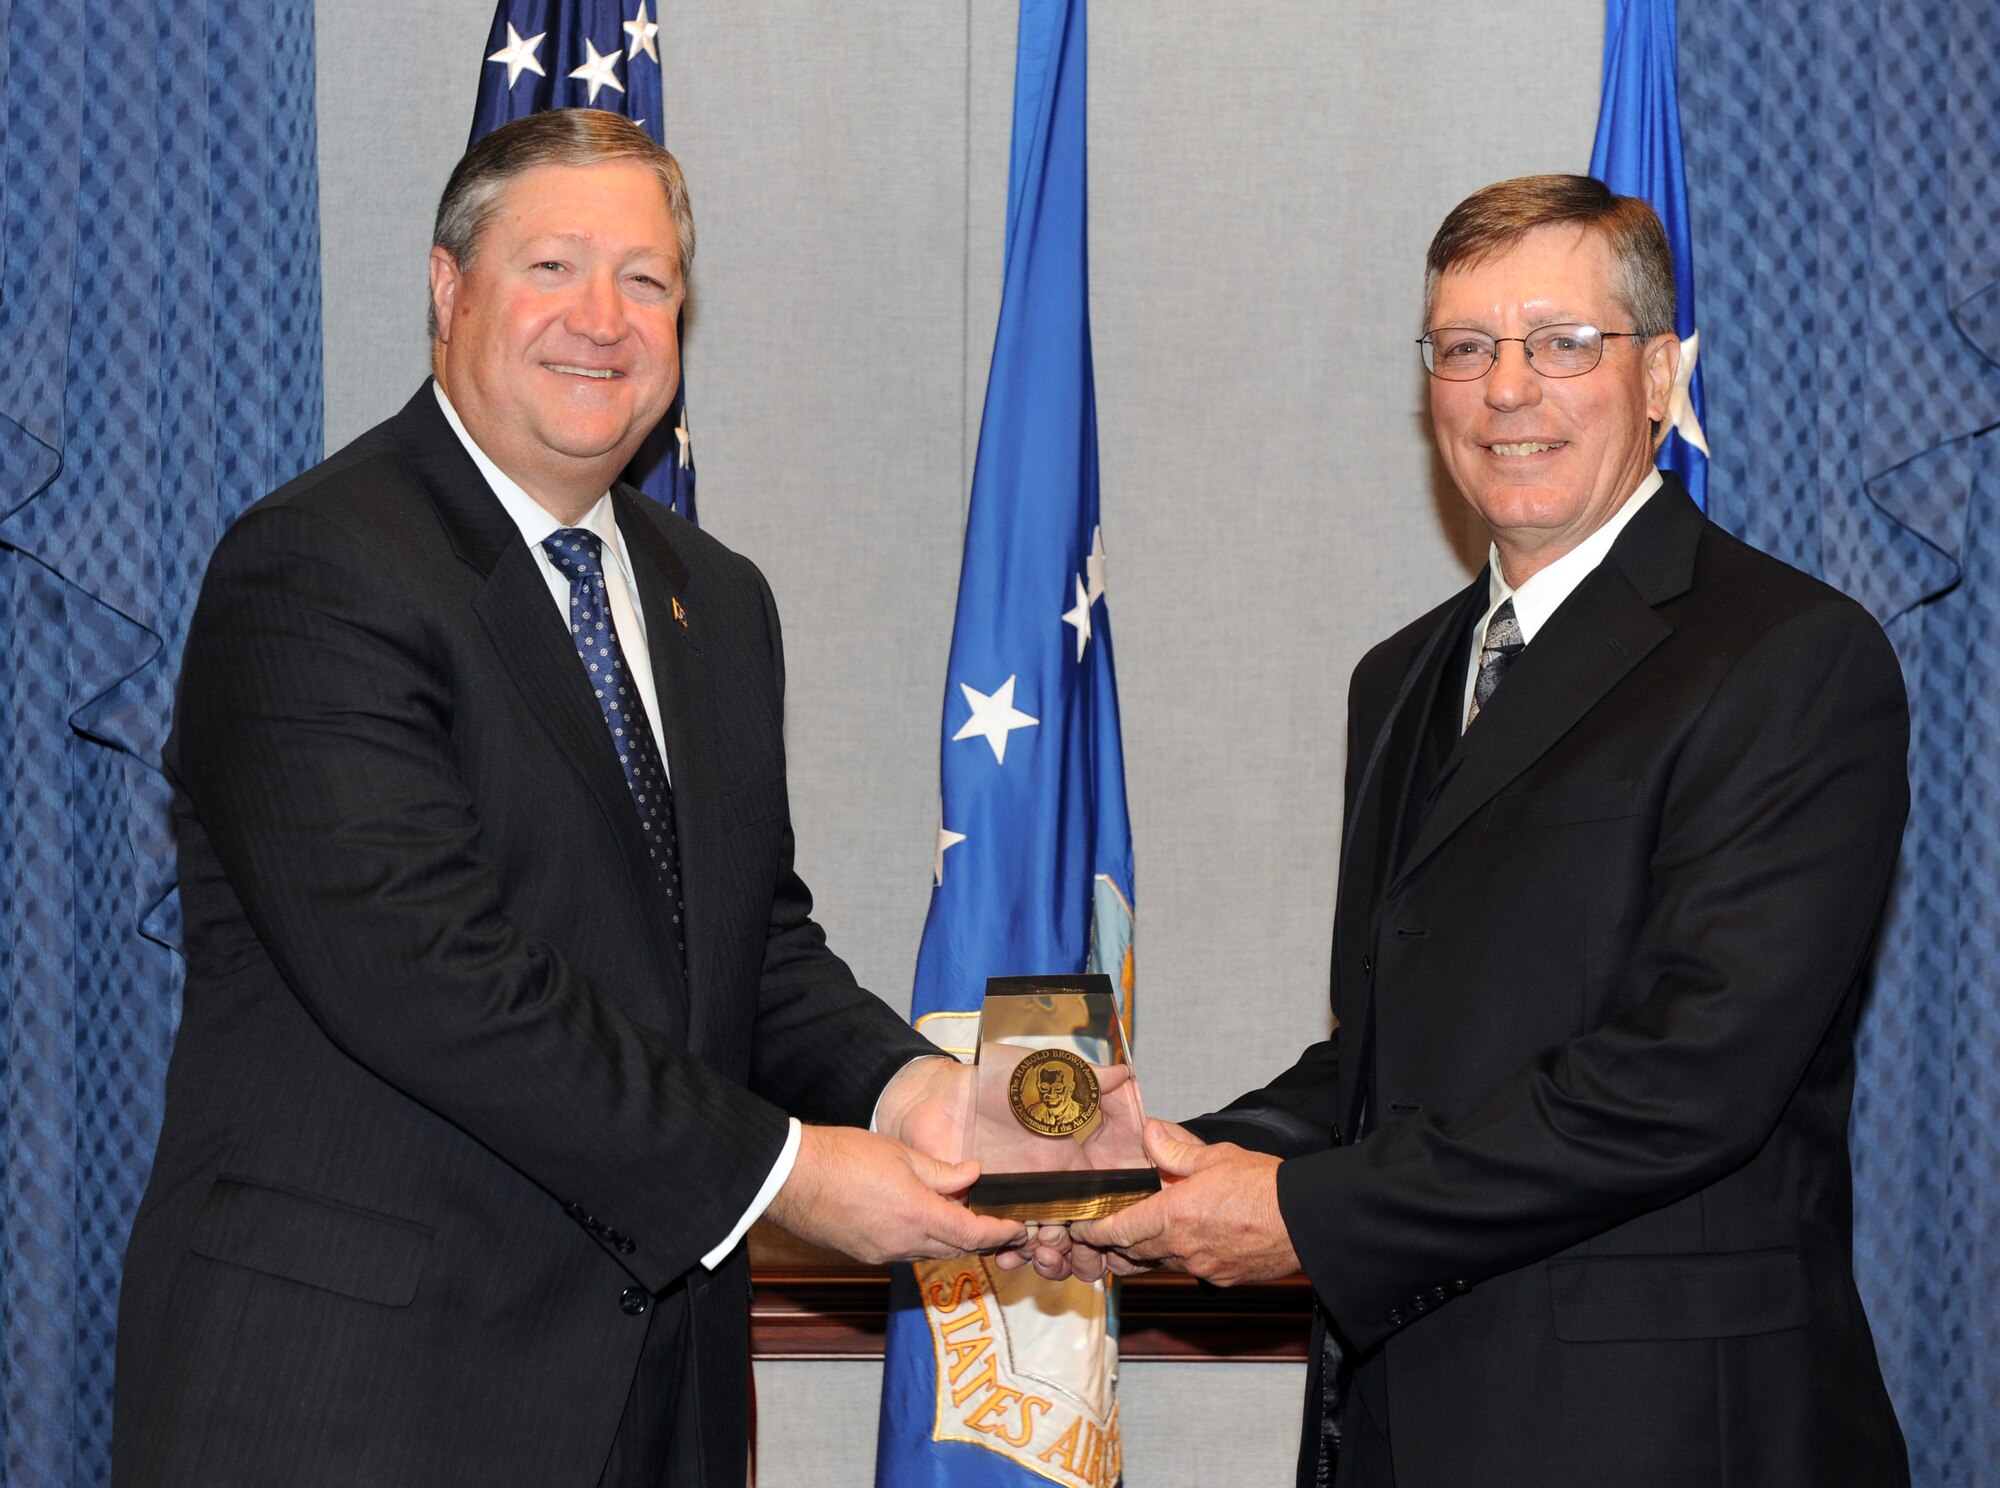 Secretary of the Air Force Michael Donley presents  the 2011 Harold Brown Award to Dr. Michael Hooser during a ceremony at the Pentagon, Washington, D.C., Dec. 12, 2011. The Harold Brown Award recognizes significant achievement in research and development that led to or demonstrated promise of a substantial improvement in operational effectiveness of the Air Force. (U.S. Air Force photo/Andy Morataya)